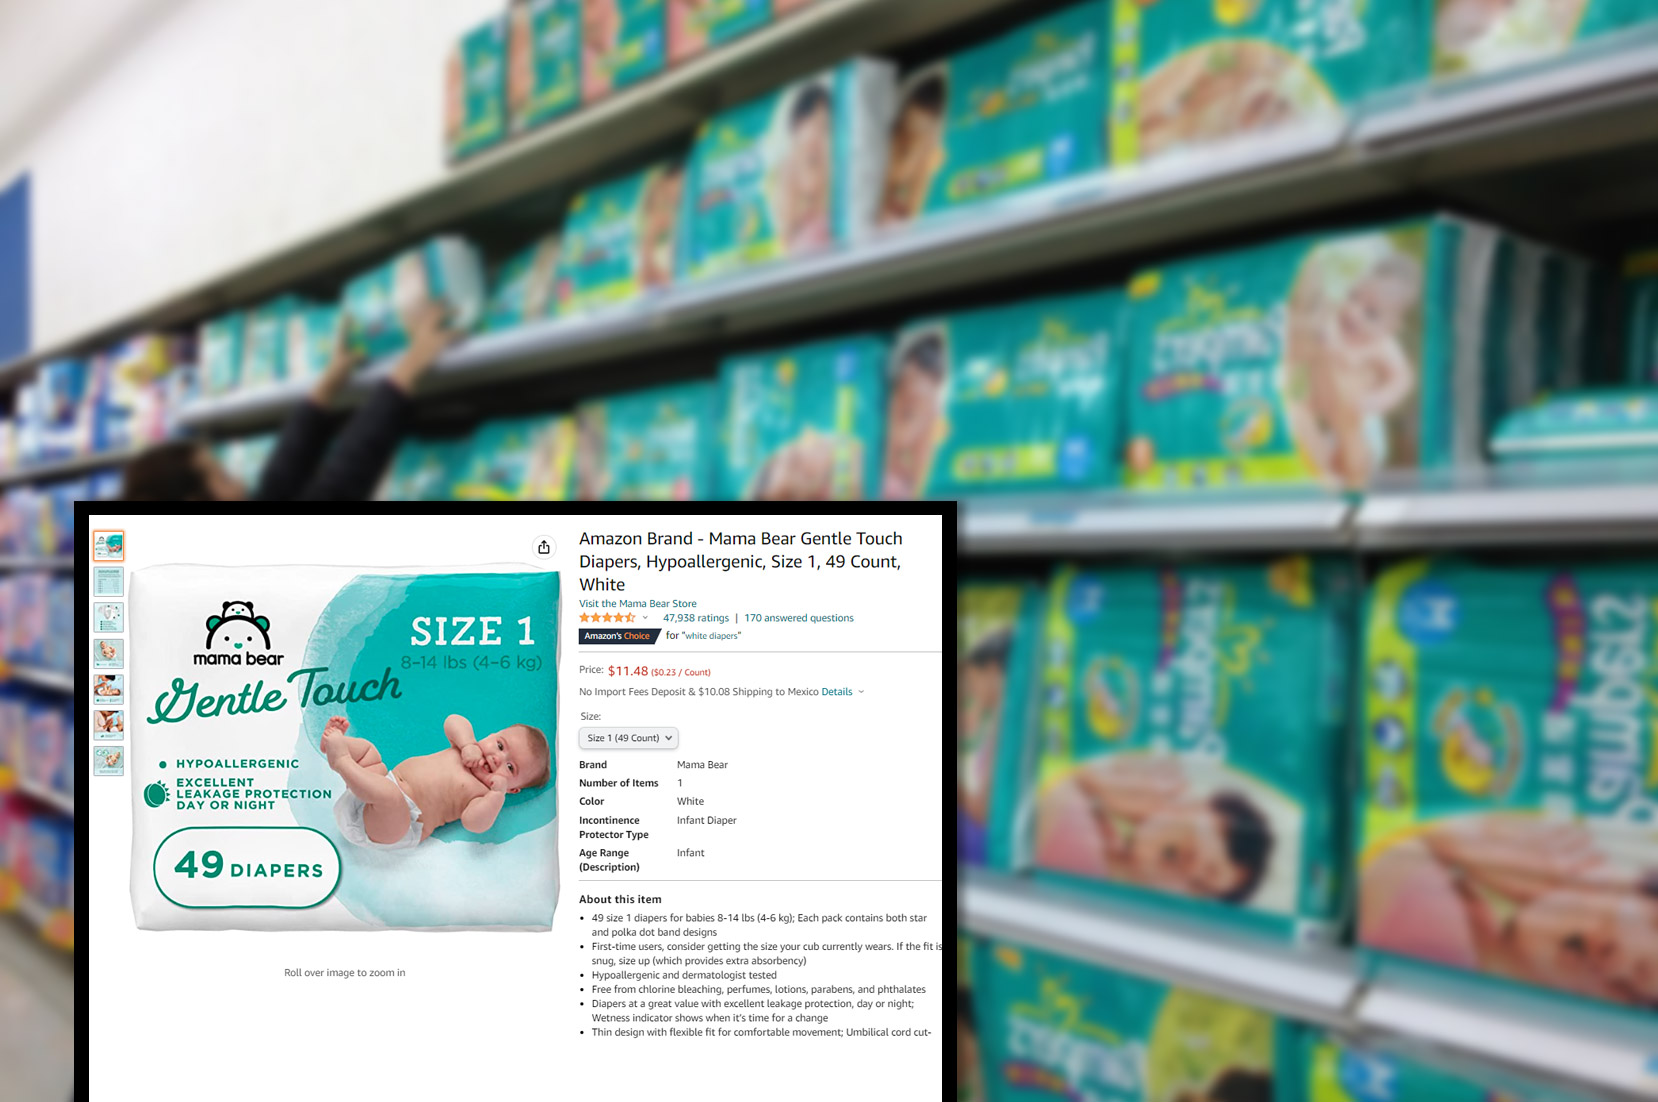 diapers-comproduct-pricing-information-and-image-scraping-services